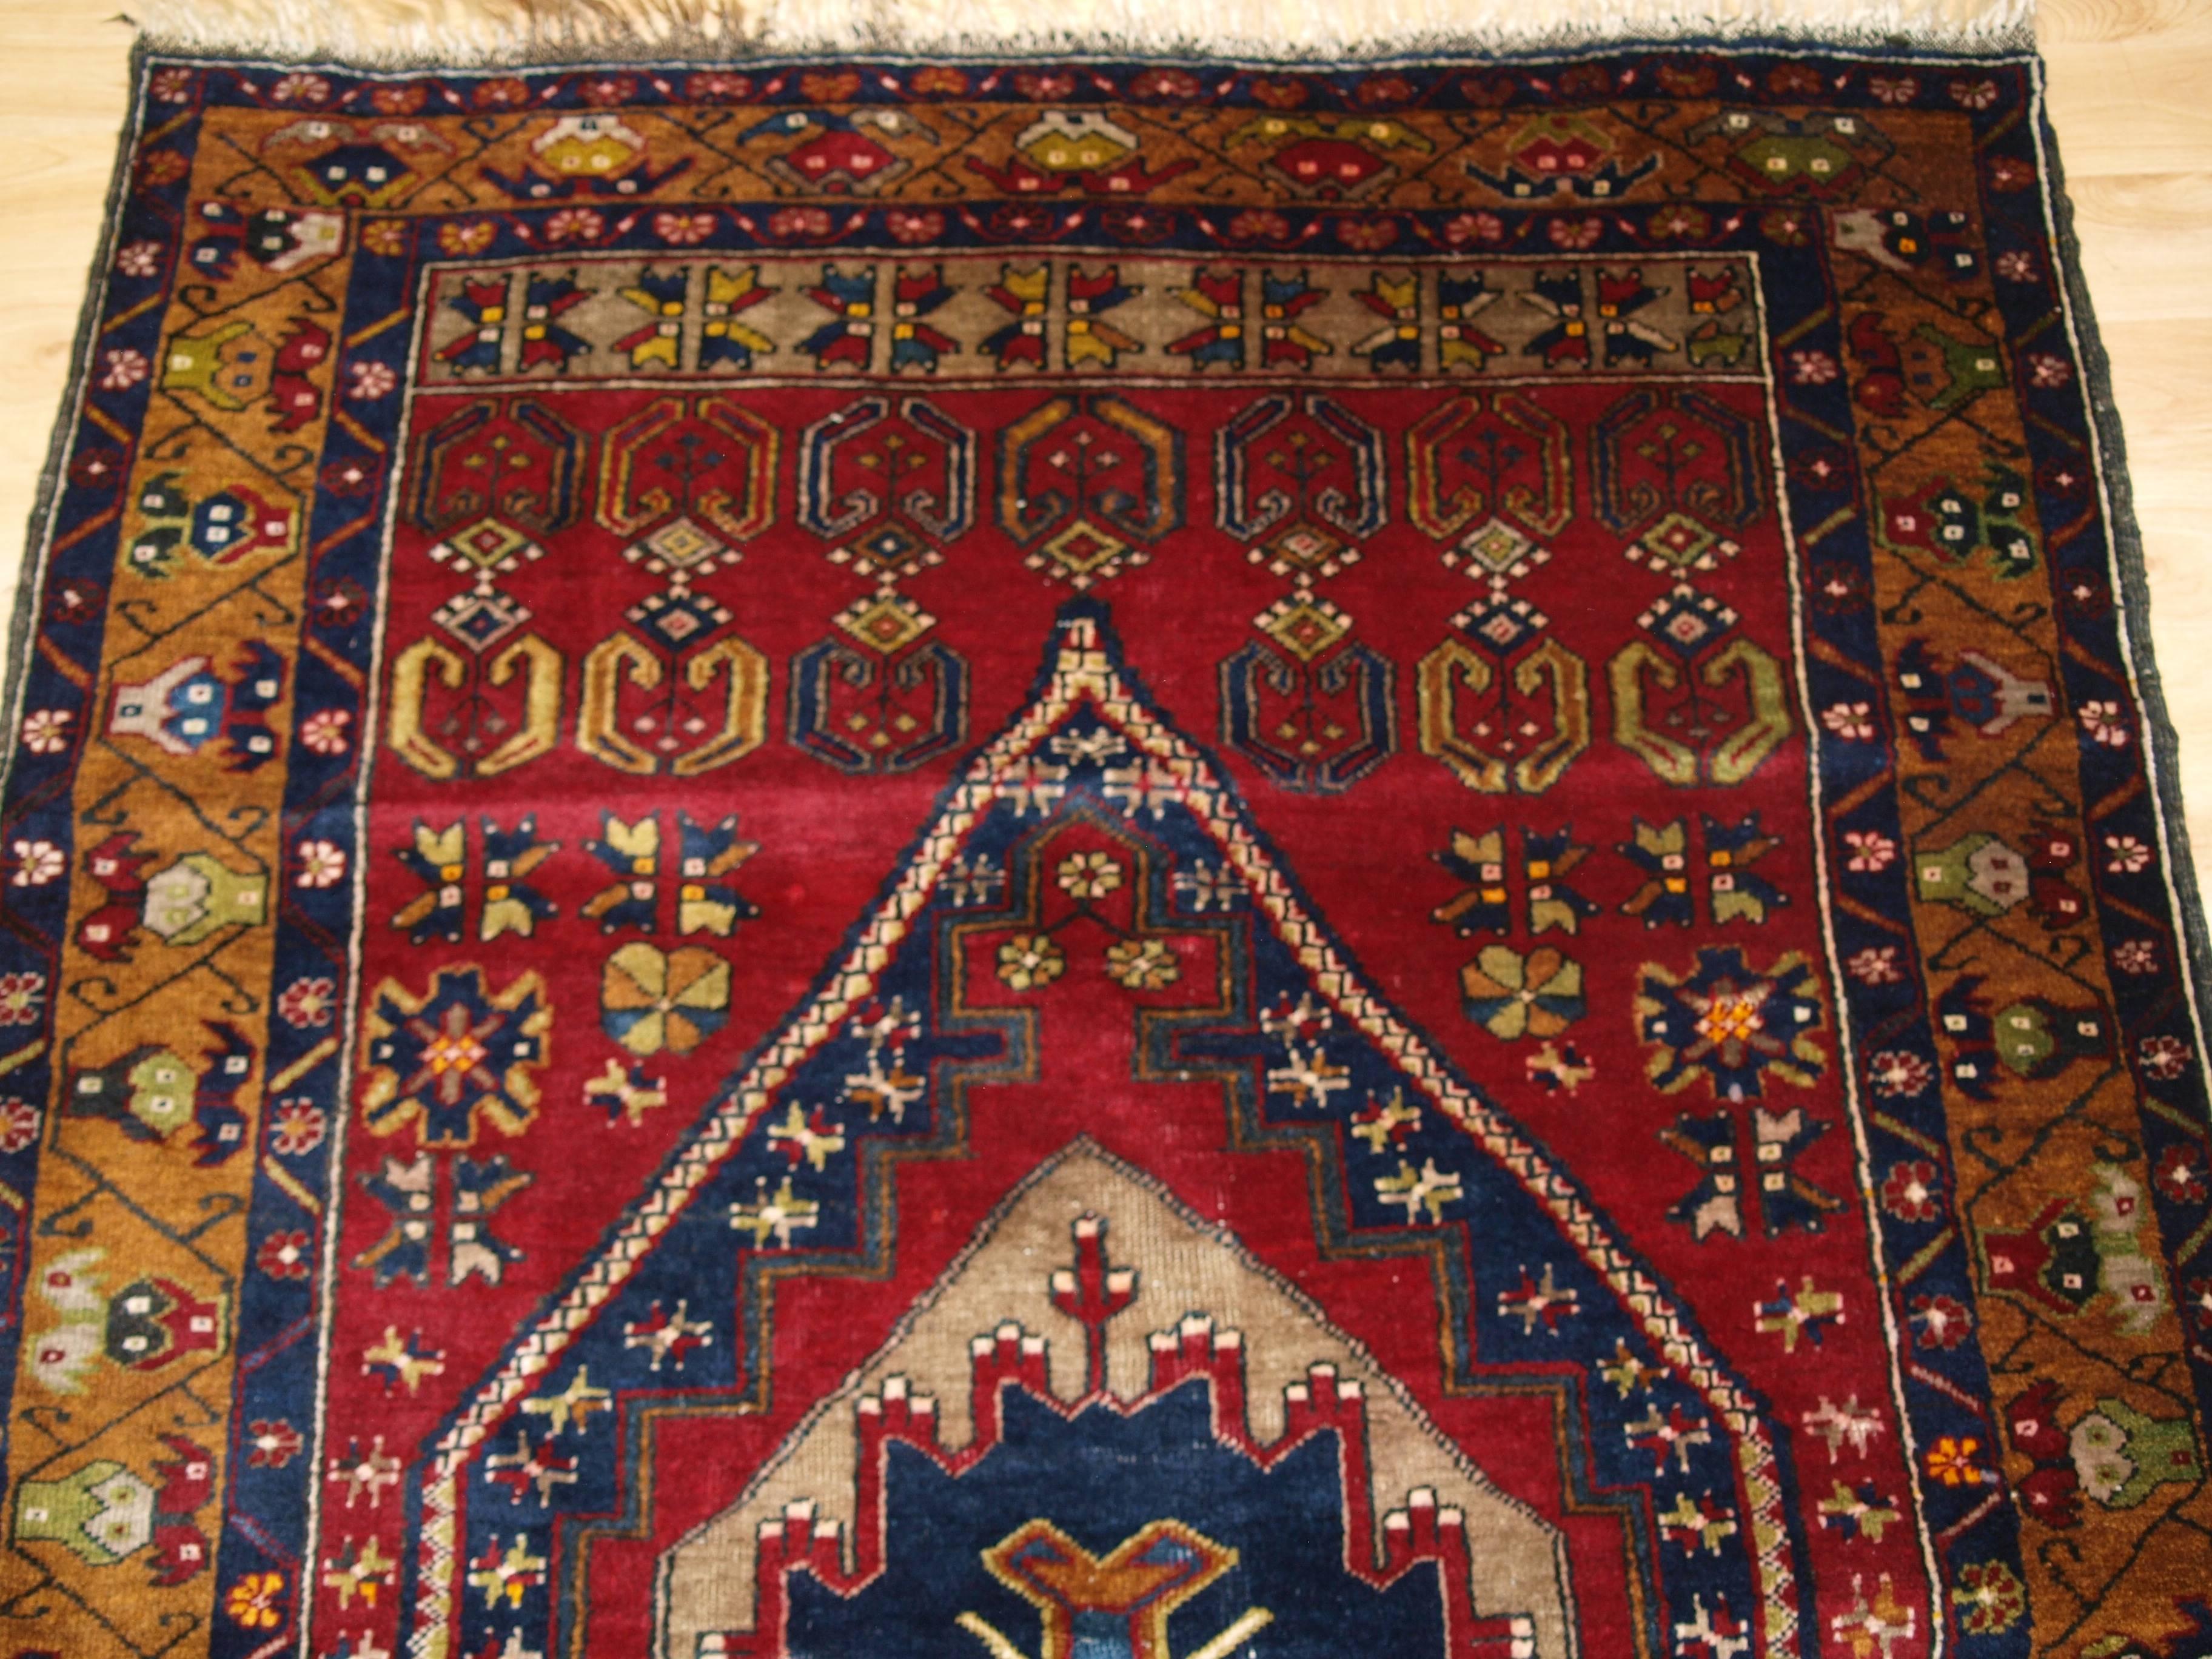 Antique Anatolian Yahyali Rug with Traditional Large Medallion Design circa 1920 In Excellent Condition For Sale In Moreton-in-Marsh, GB